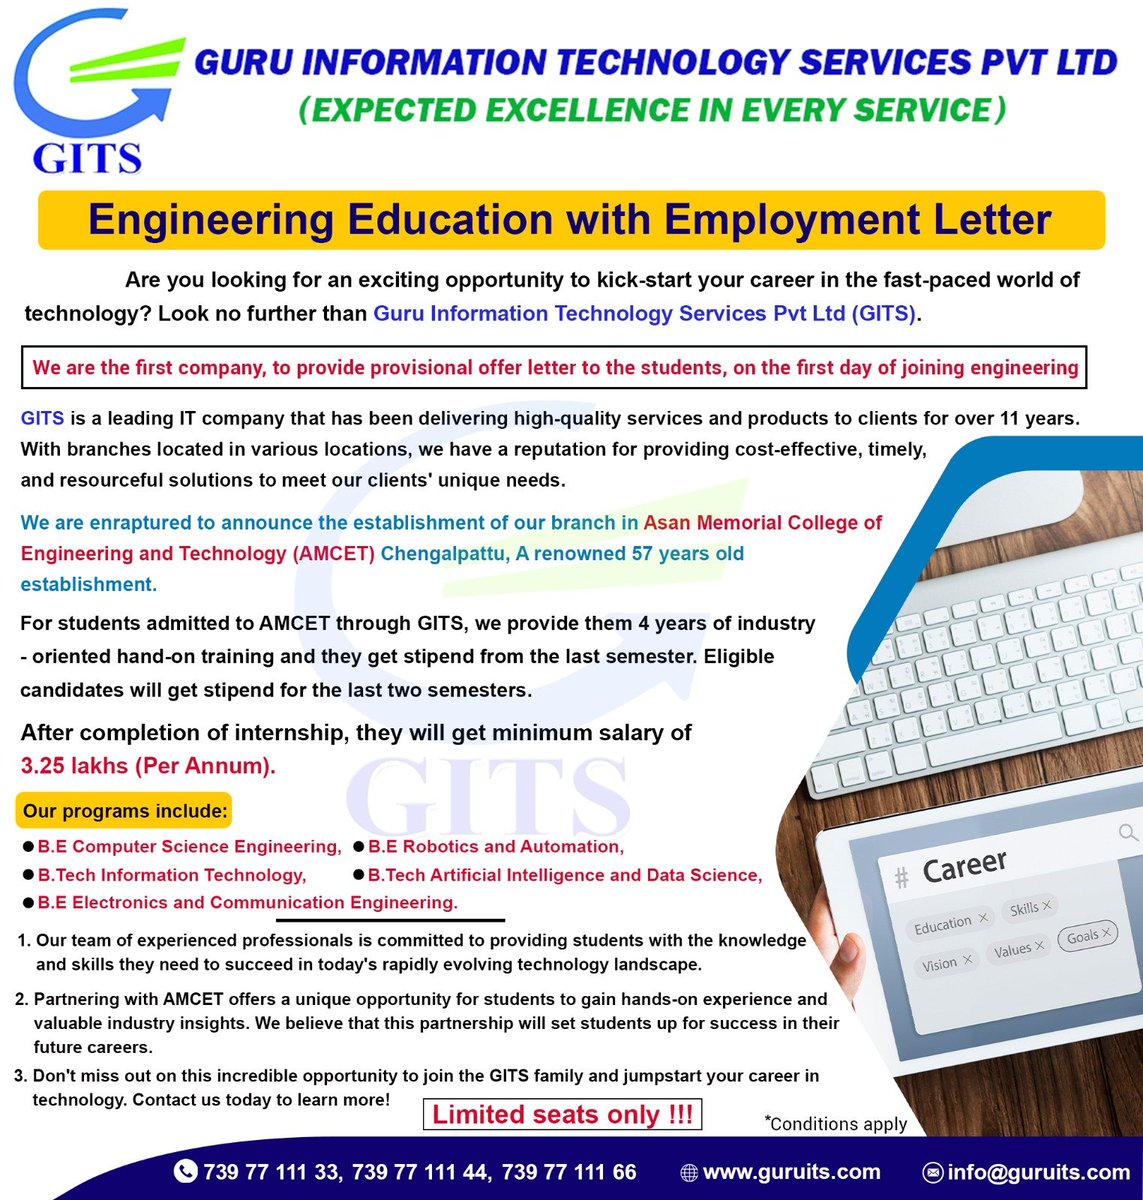 Engineering Education with Employment Letter
#AMCET #Chengalpattu #BE #BTech #qualityeducation #JOB #GITS #informationtechnology #careergrowth #collerbration #career #joboffering #offerletter #engineeringstudents #joboffer #JobOpportunity #oppurtunities #IT #placement #students